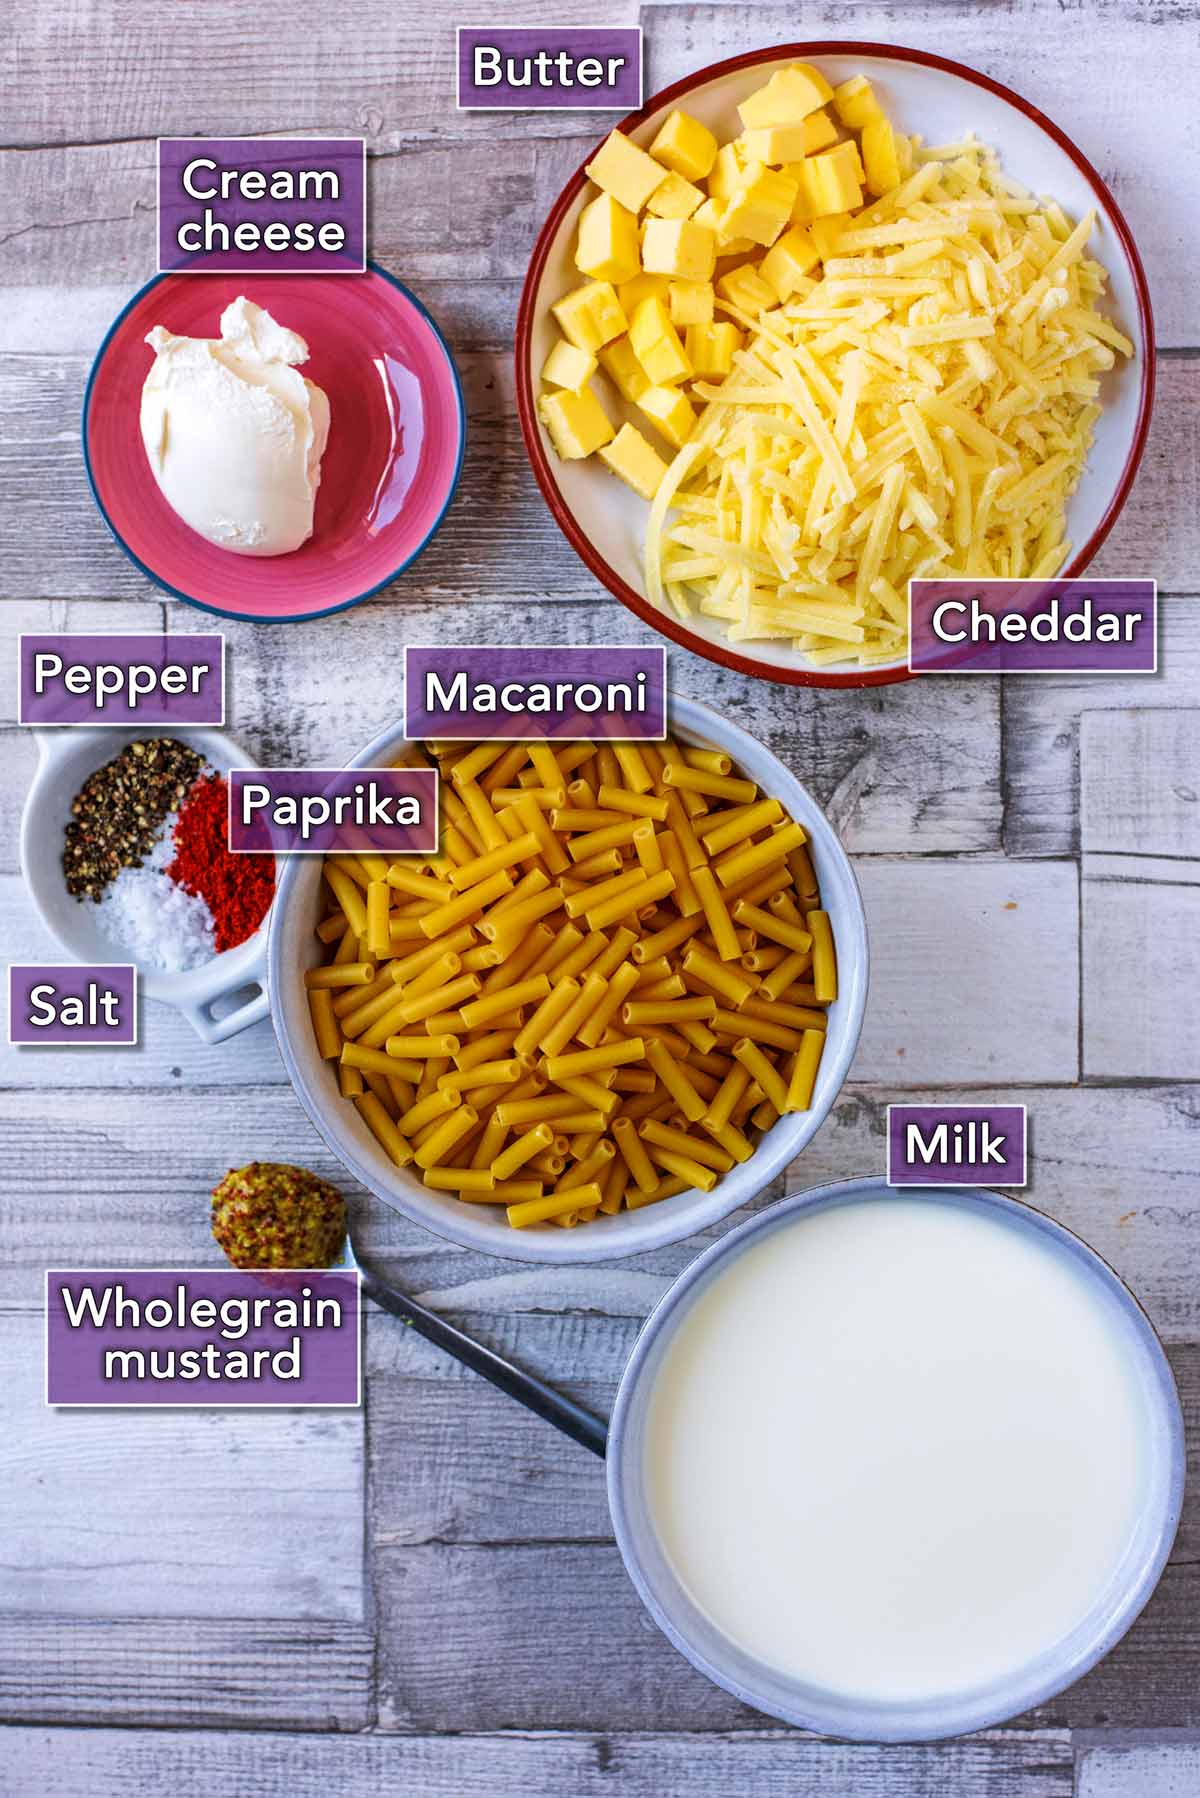 All the ingredients needed for slow cooker mac and cheese.